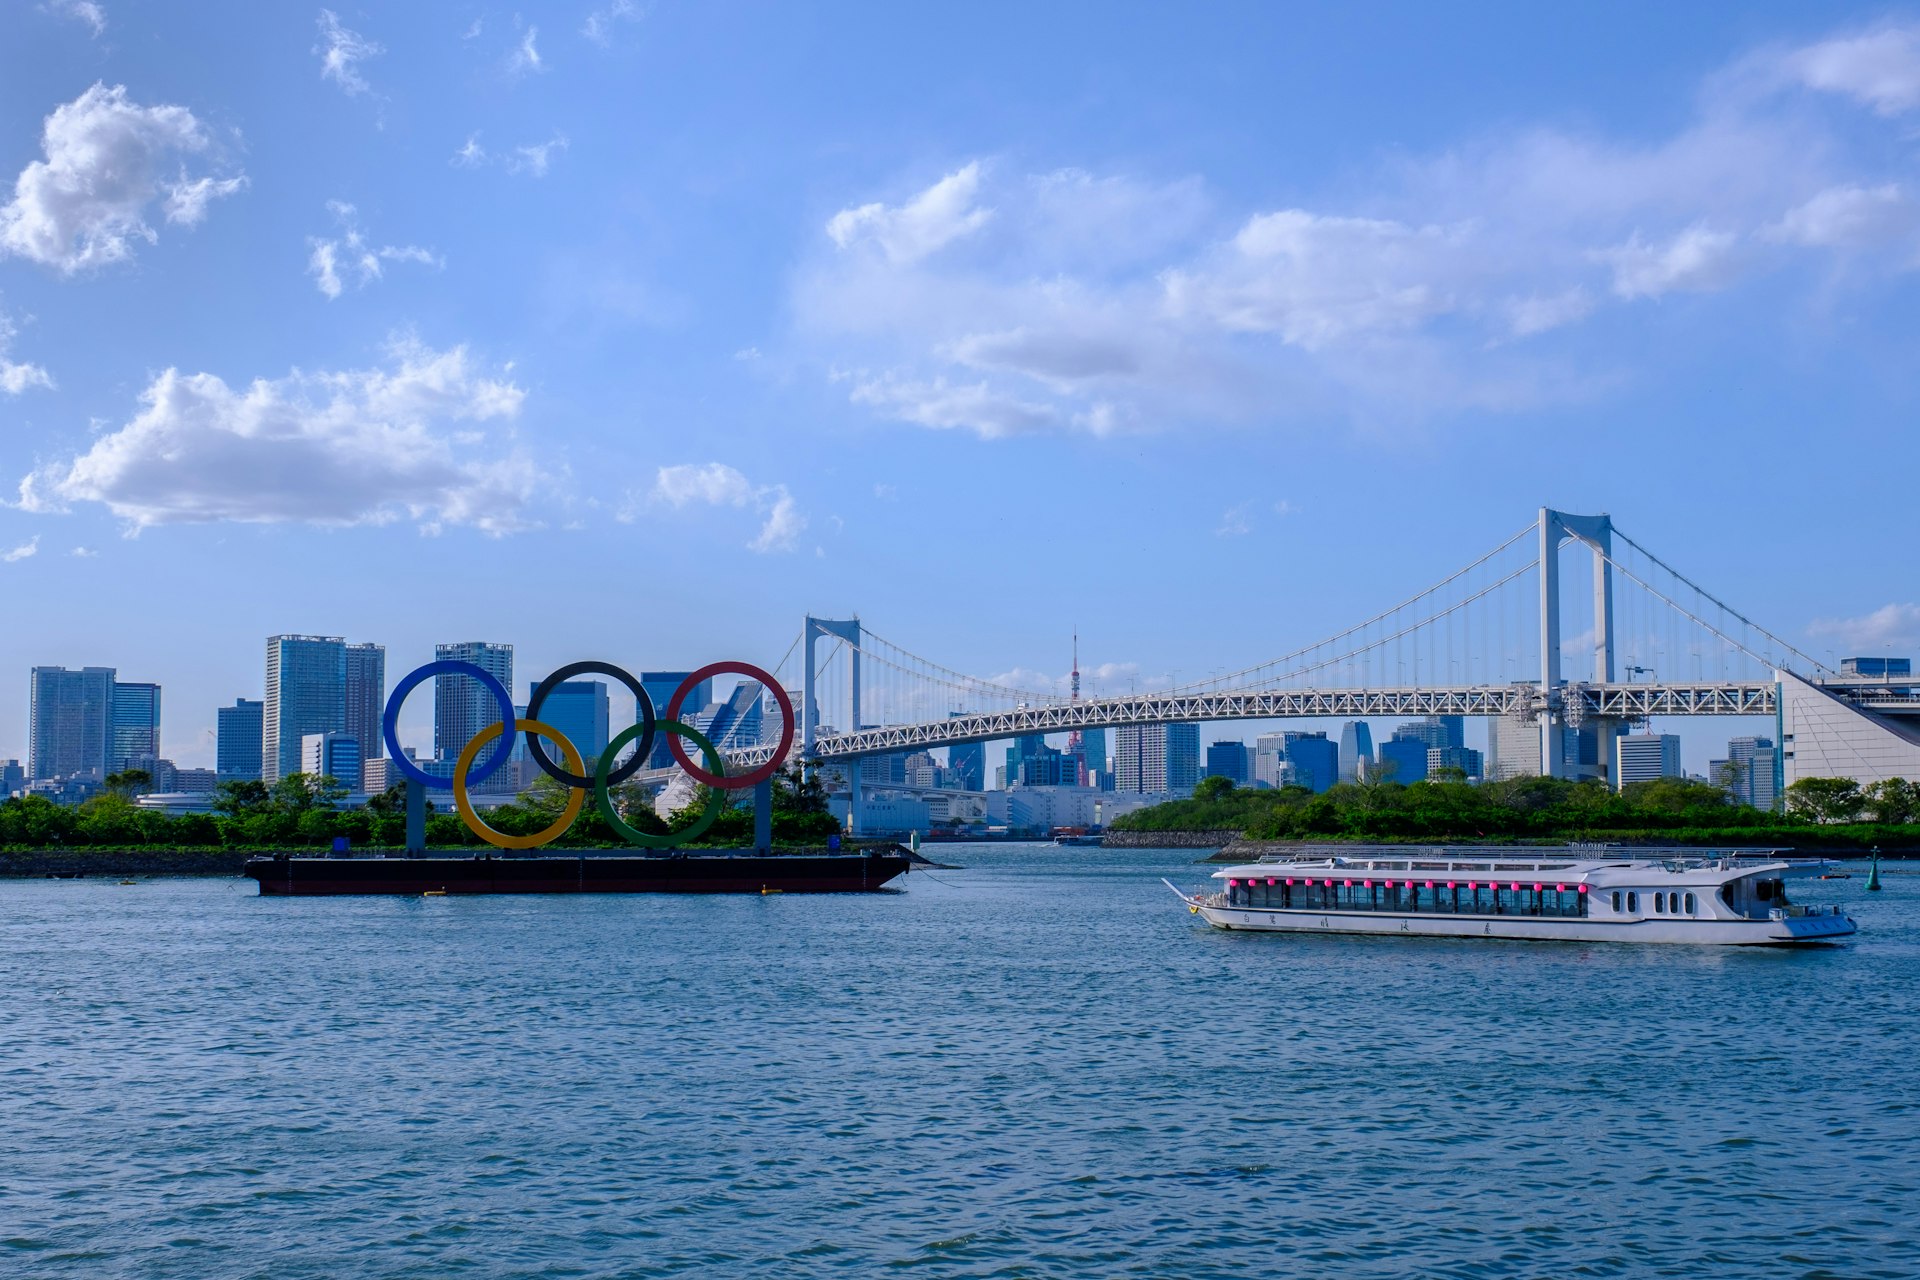 Can Tokyo 2020 Bring The World Together Safely?